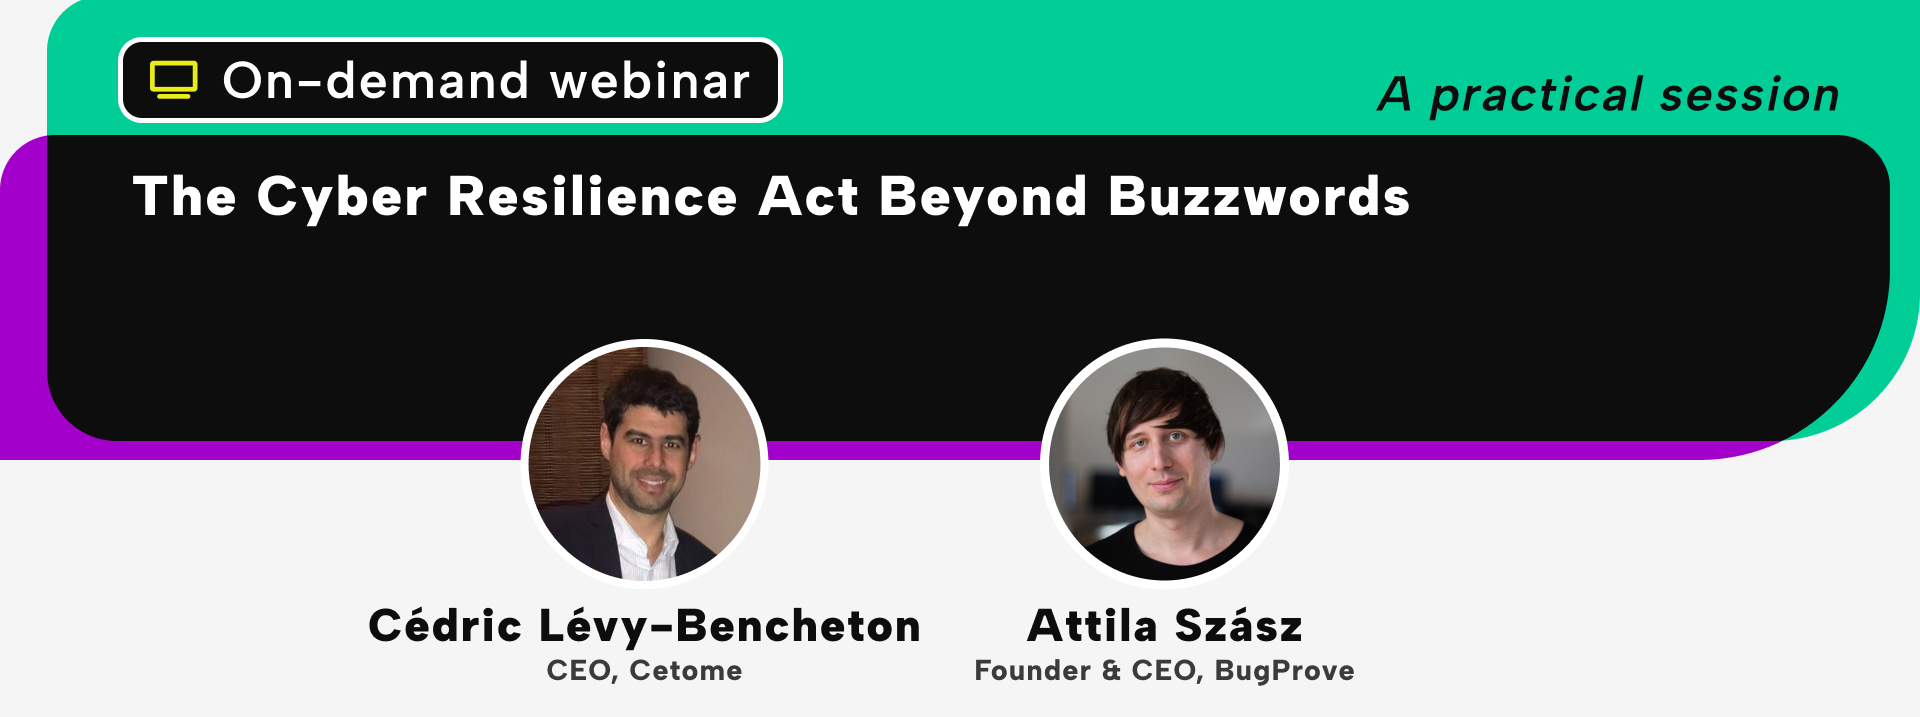 Webinar on-demand: The Cyber Resilience Act Beyond Buzzwords